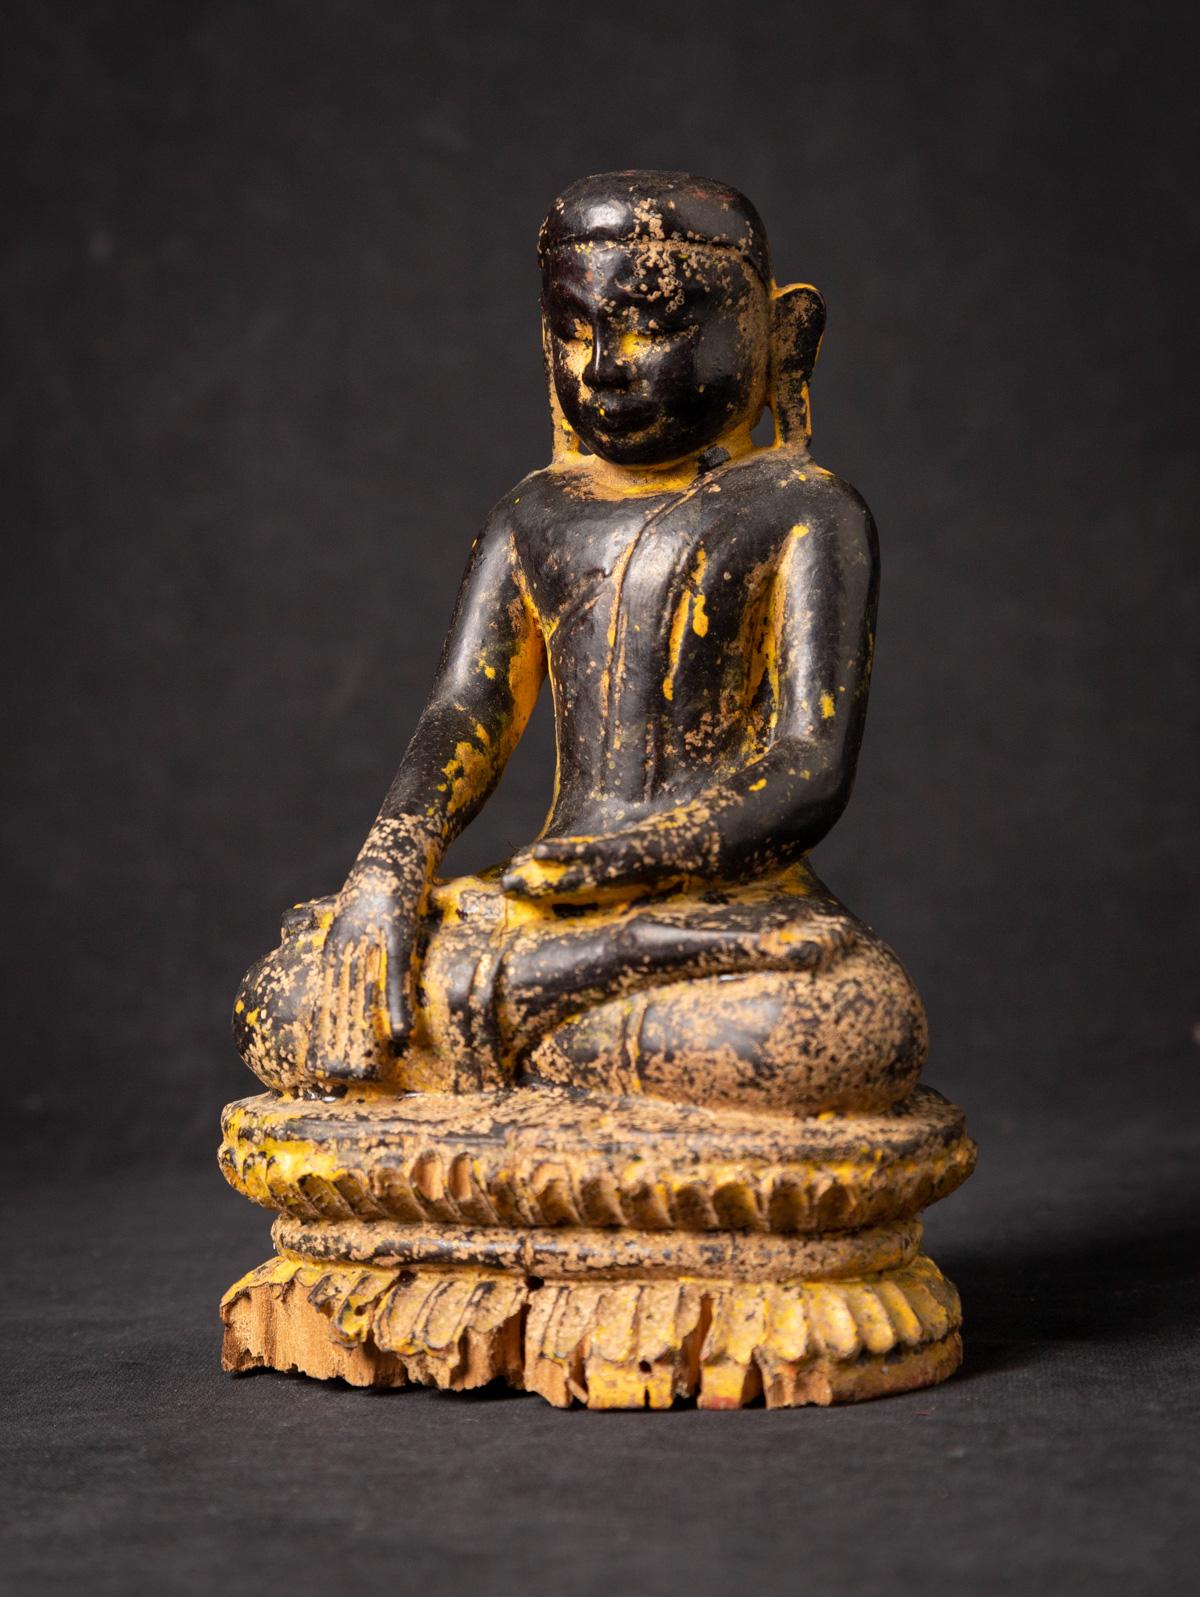 The very early antique wooden Burmese Monk statue you've described is a remarkable and historically significant piece of art. Crafted from wood and originating from Burma, this statue offers a glimpse into the artistic and spiritual traditions of